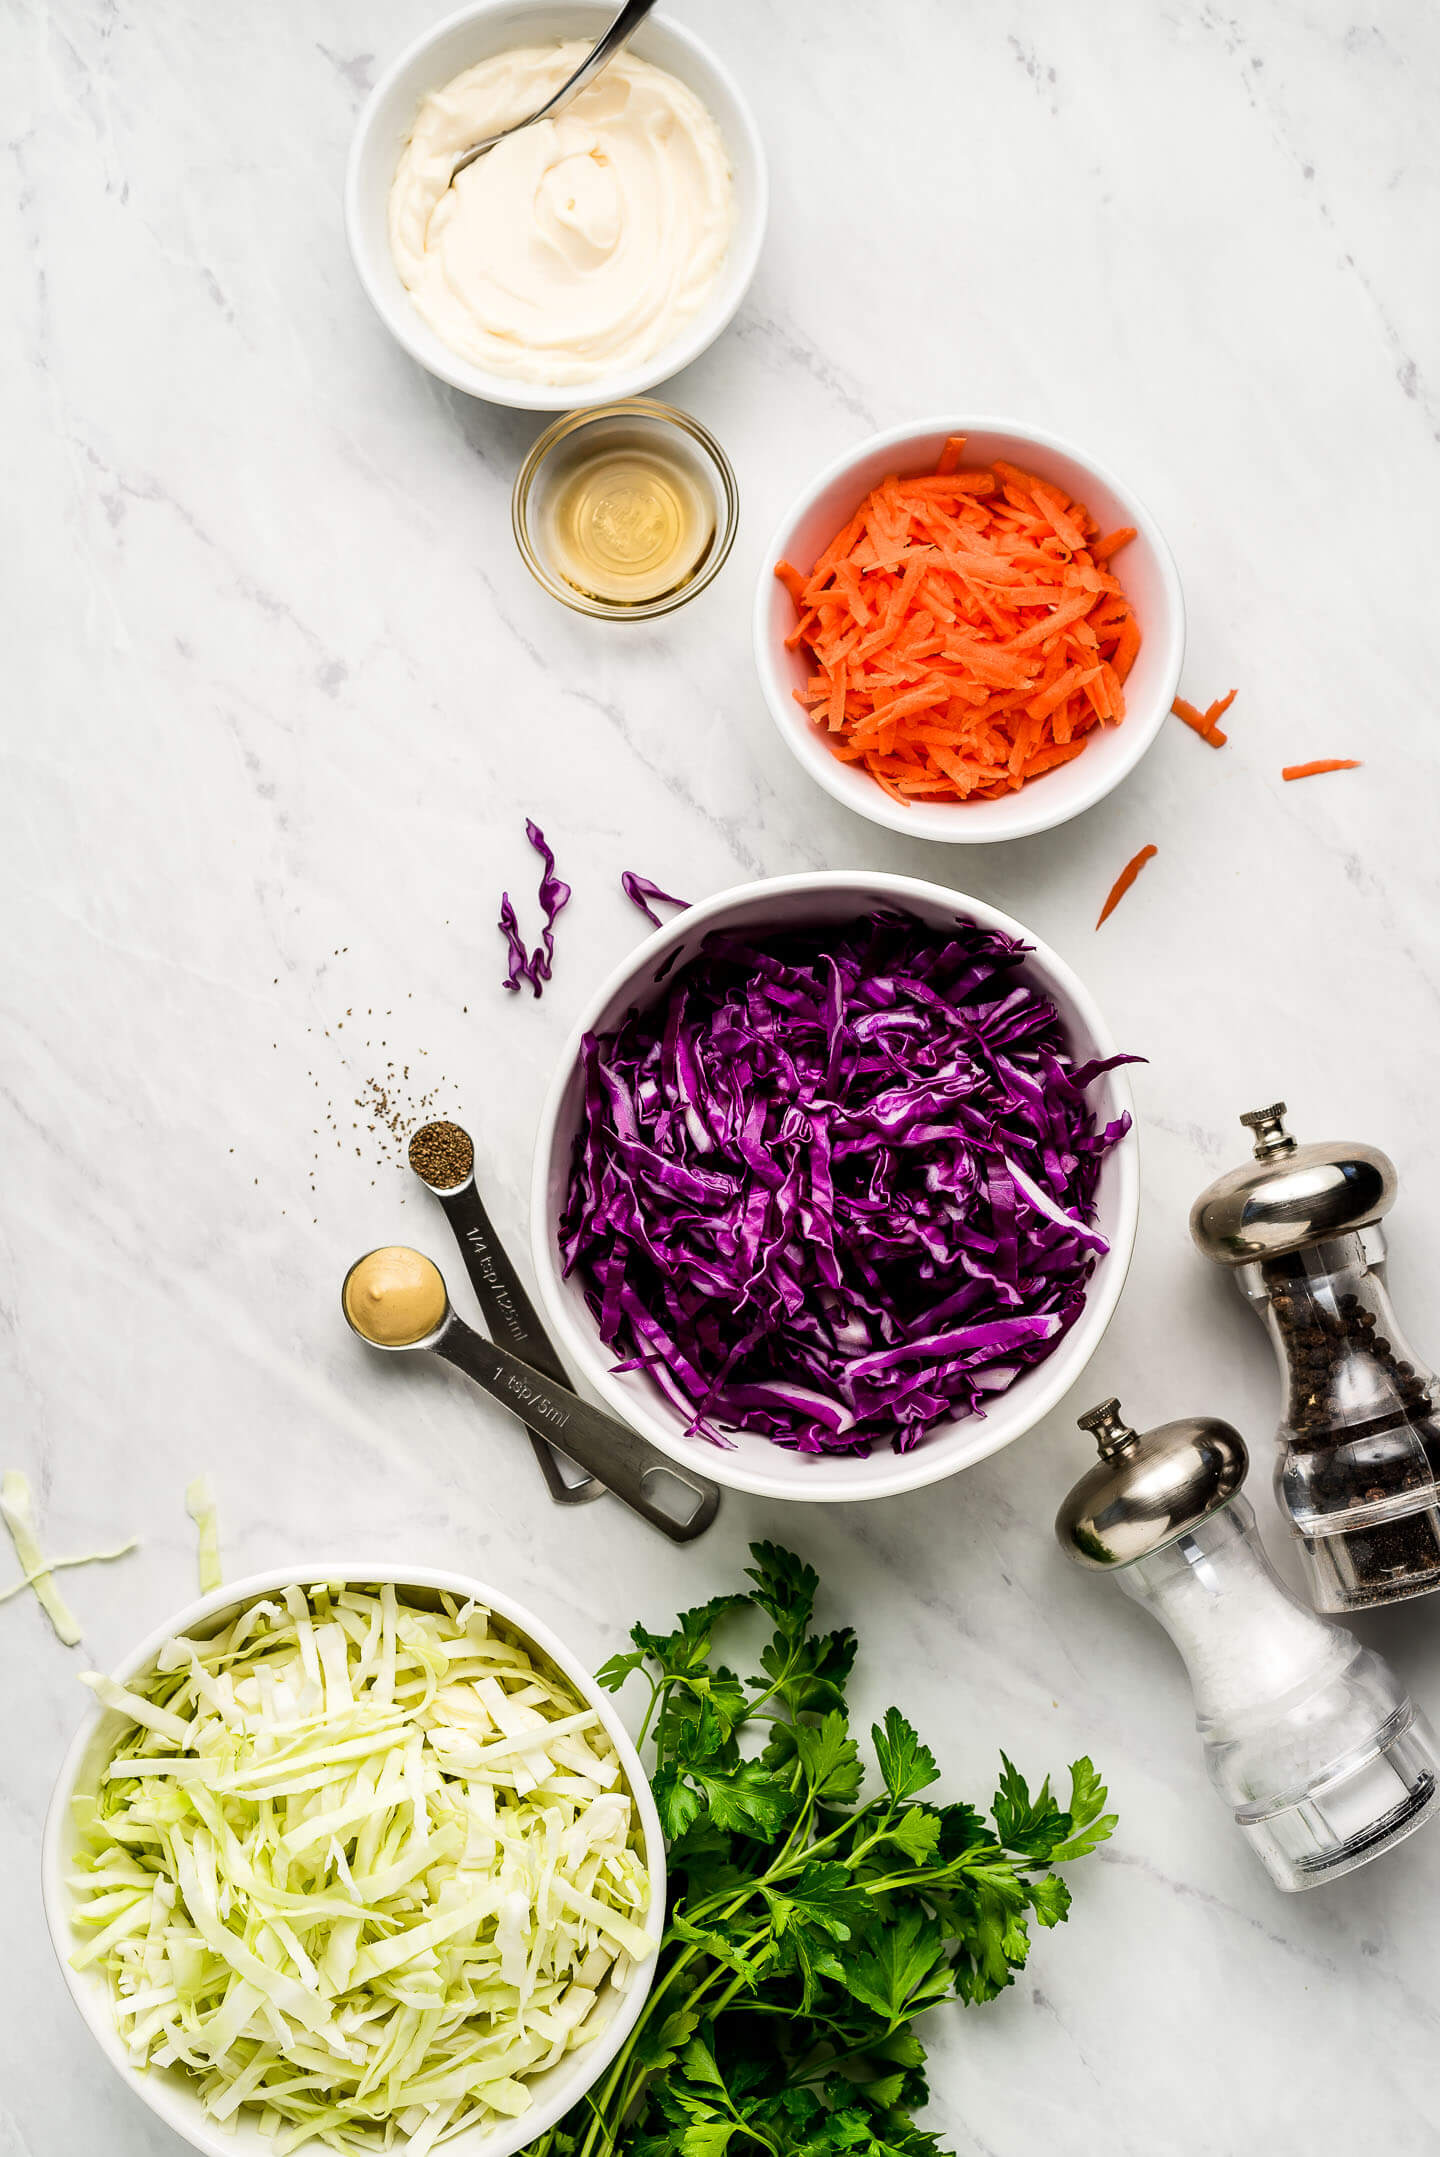 Ingredients on a marble surface- mayonnaise, vinegar, shredded carrots, red and green cabbage, and parsley.